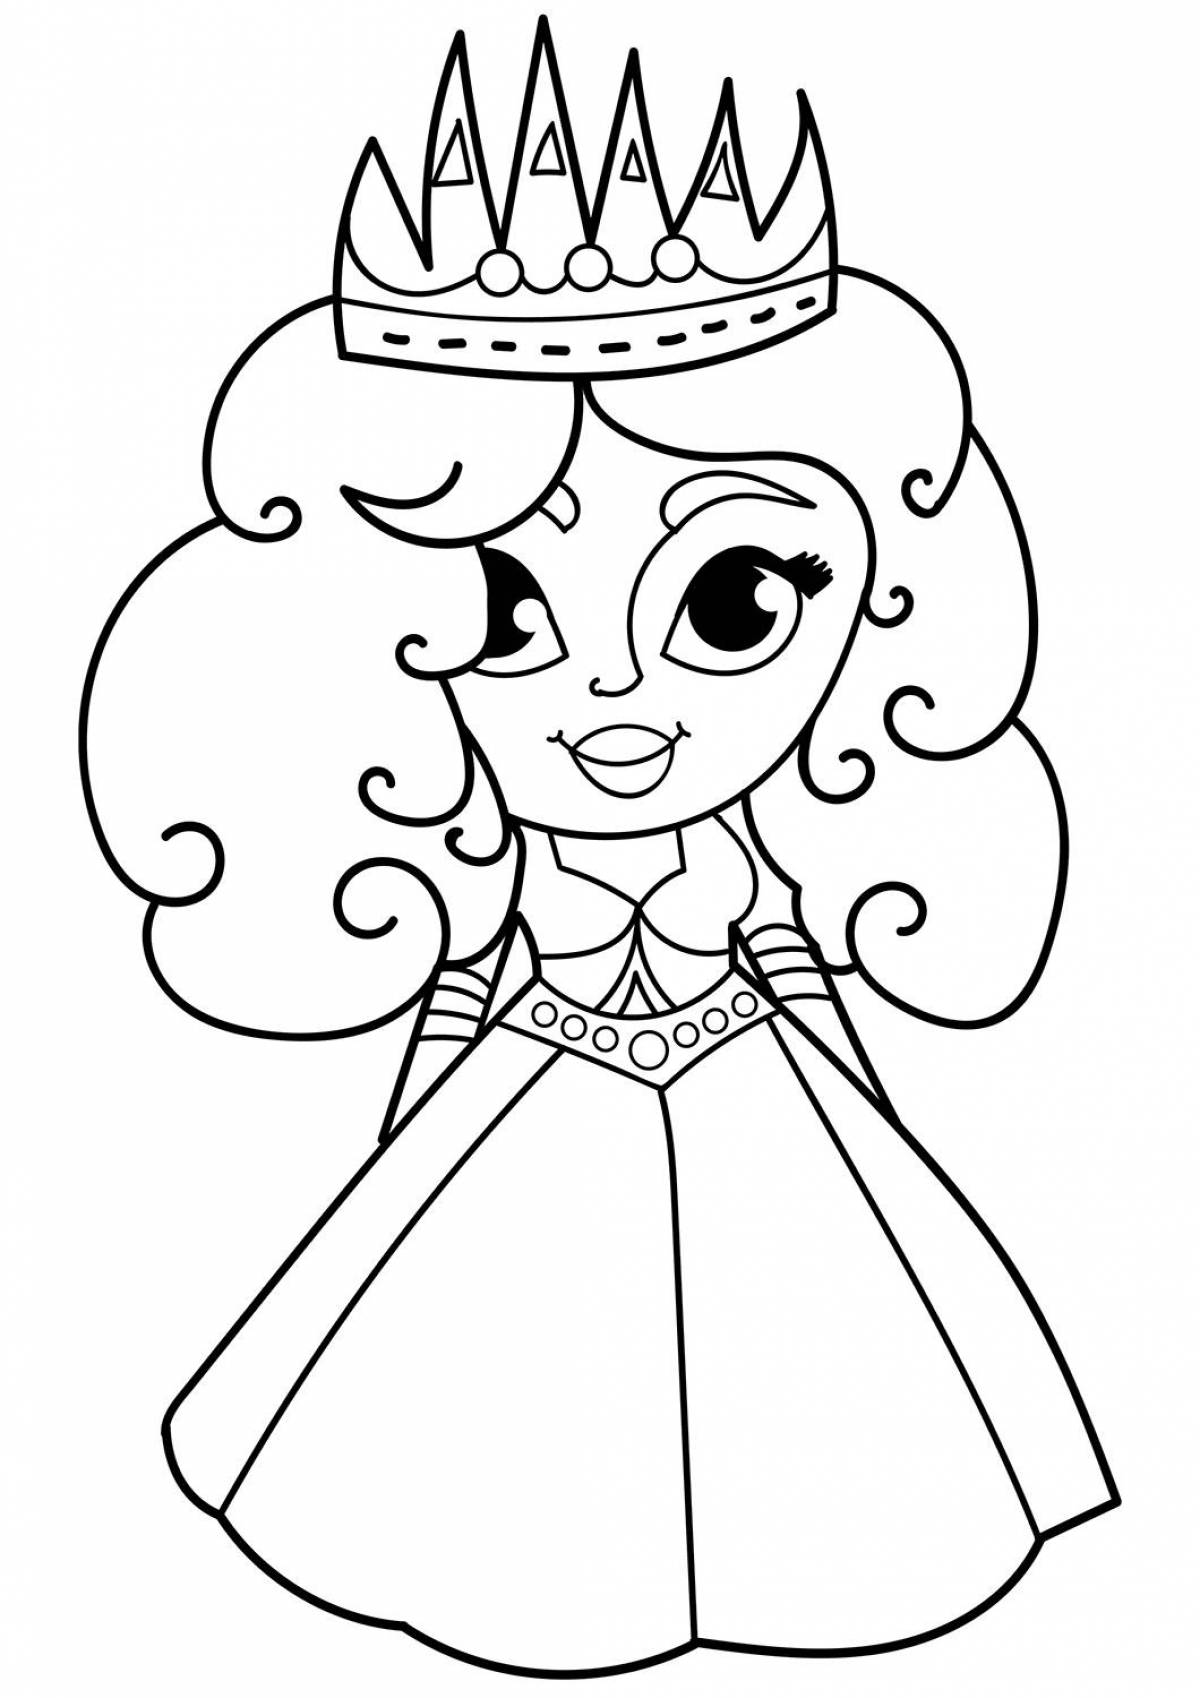 Fairytale princess coloring book for children 3-4 years old